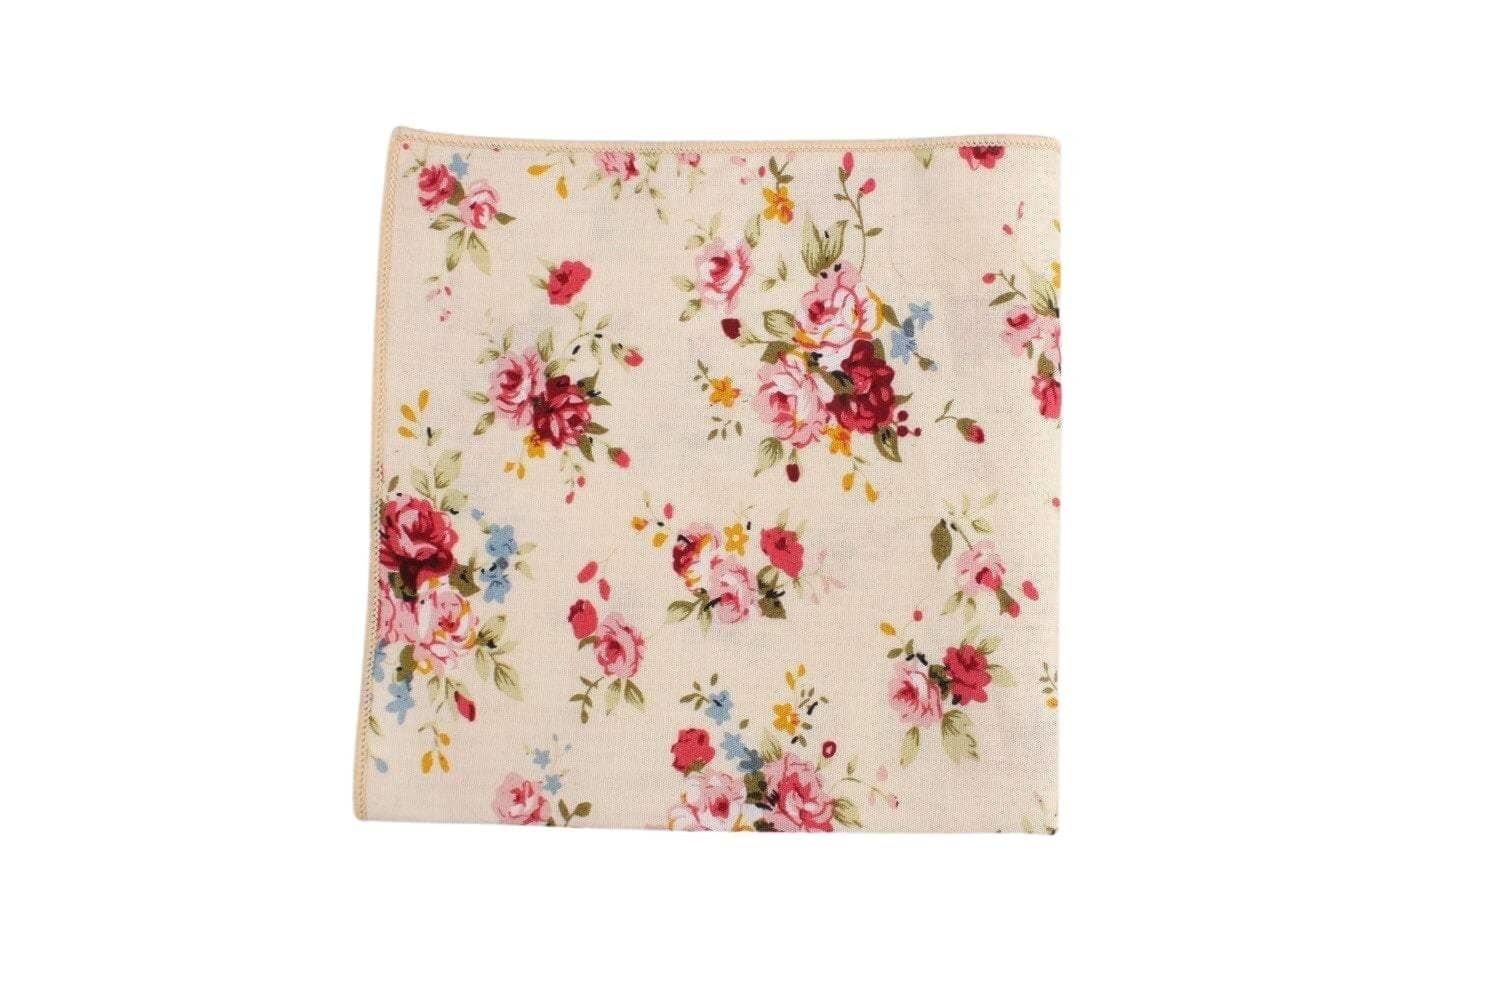 Cream Floral Pocket Square JONAH Mytieshop Cream Floral Pocket SquareMaterial CottonItem Length: 23 cm ( 9 inches)Item Width : 22 cm (8.6 inches) A dashing way to top off your tuxedo. This floral pocket square is the perfect finishing touch to your wedding day ensemble. With its soft cream color and intricate floral print, it&#39;s sure to make a statement. Add a touch of personality to your look with this dashing pocket square. It&#39;s sure to make you feel like the best dressed man in the room.